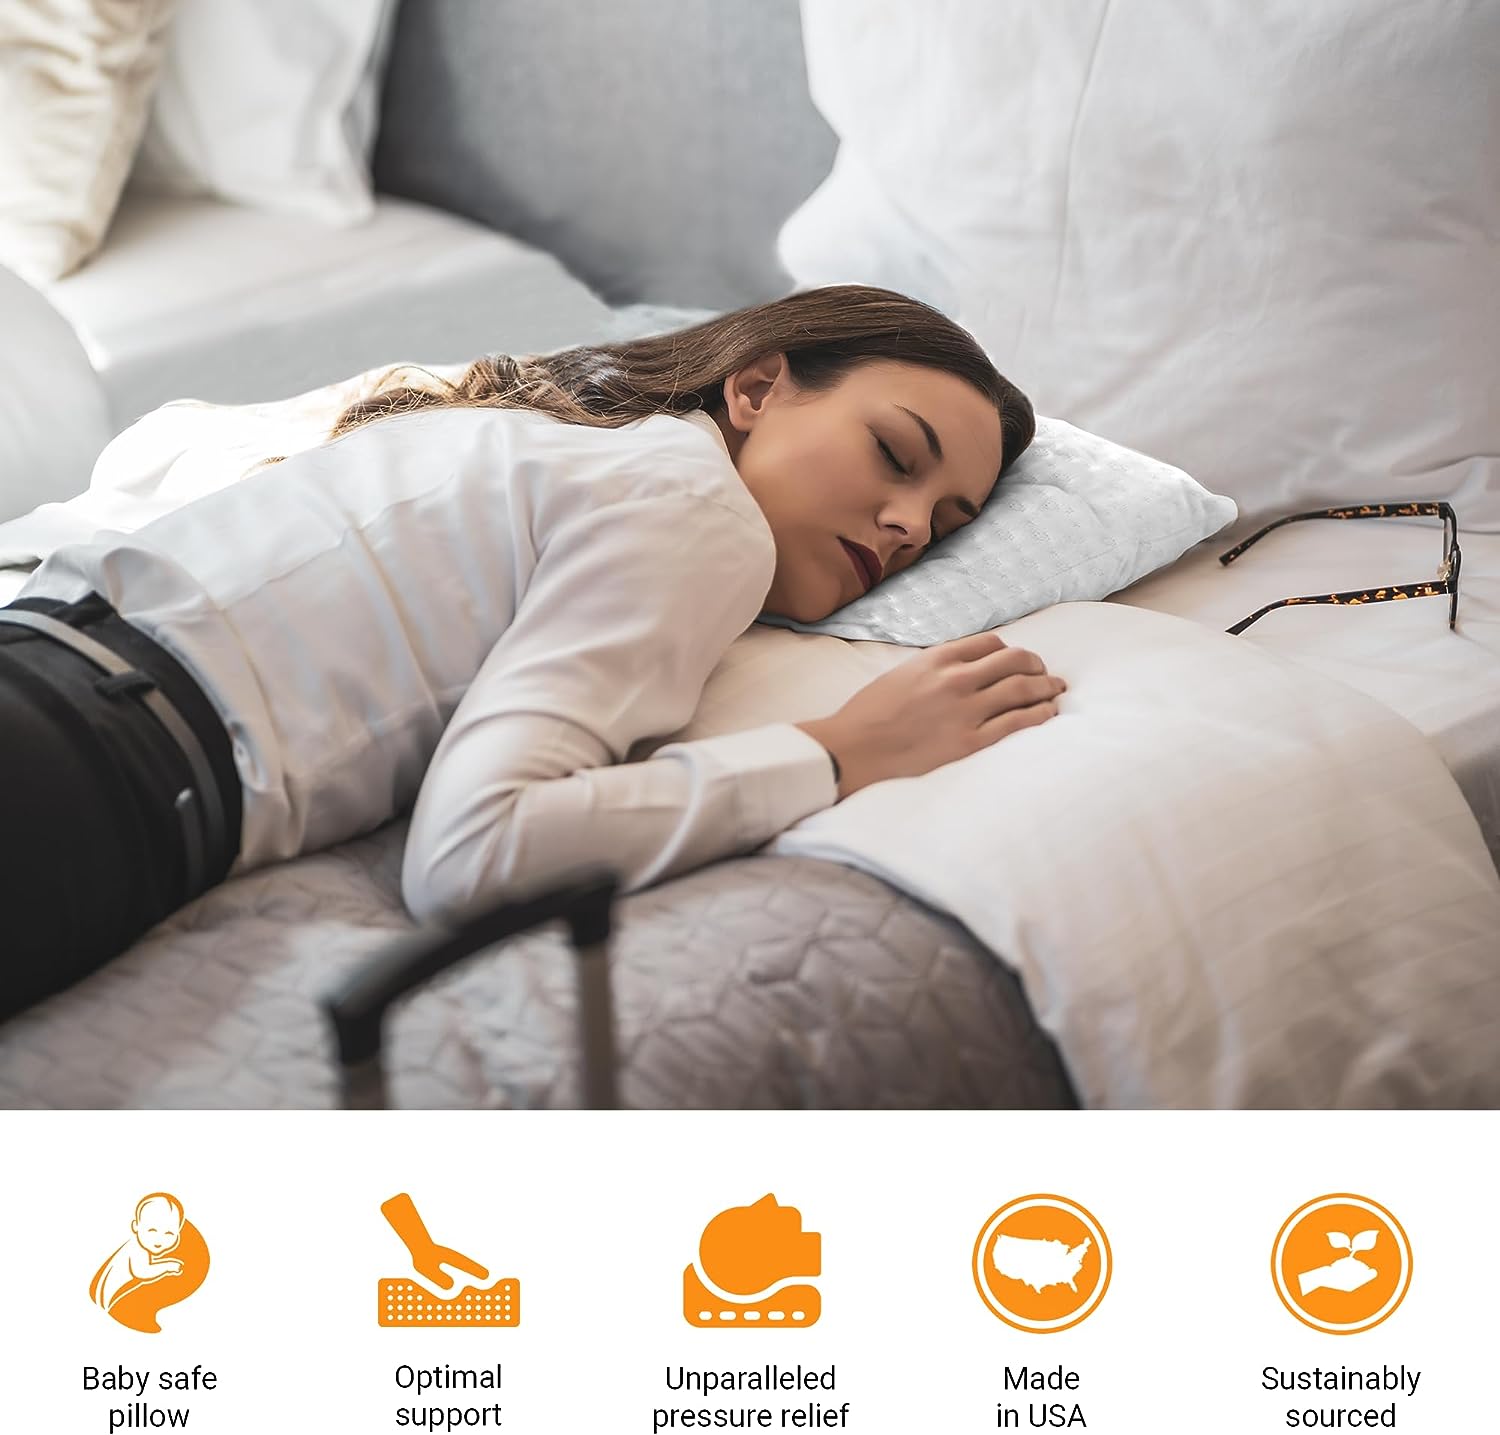 Key Features of the Juvea Travel Pillow